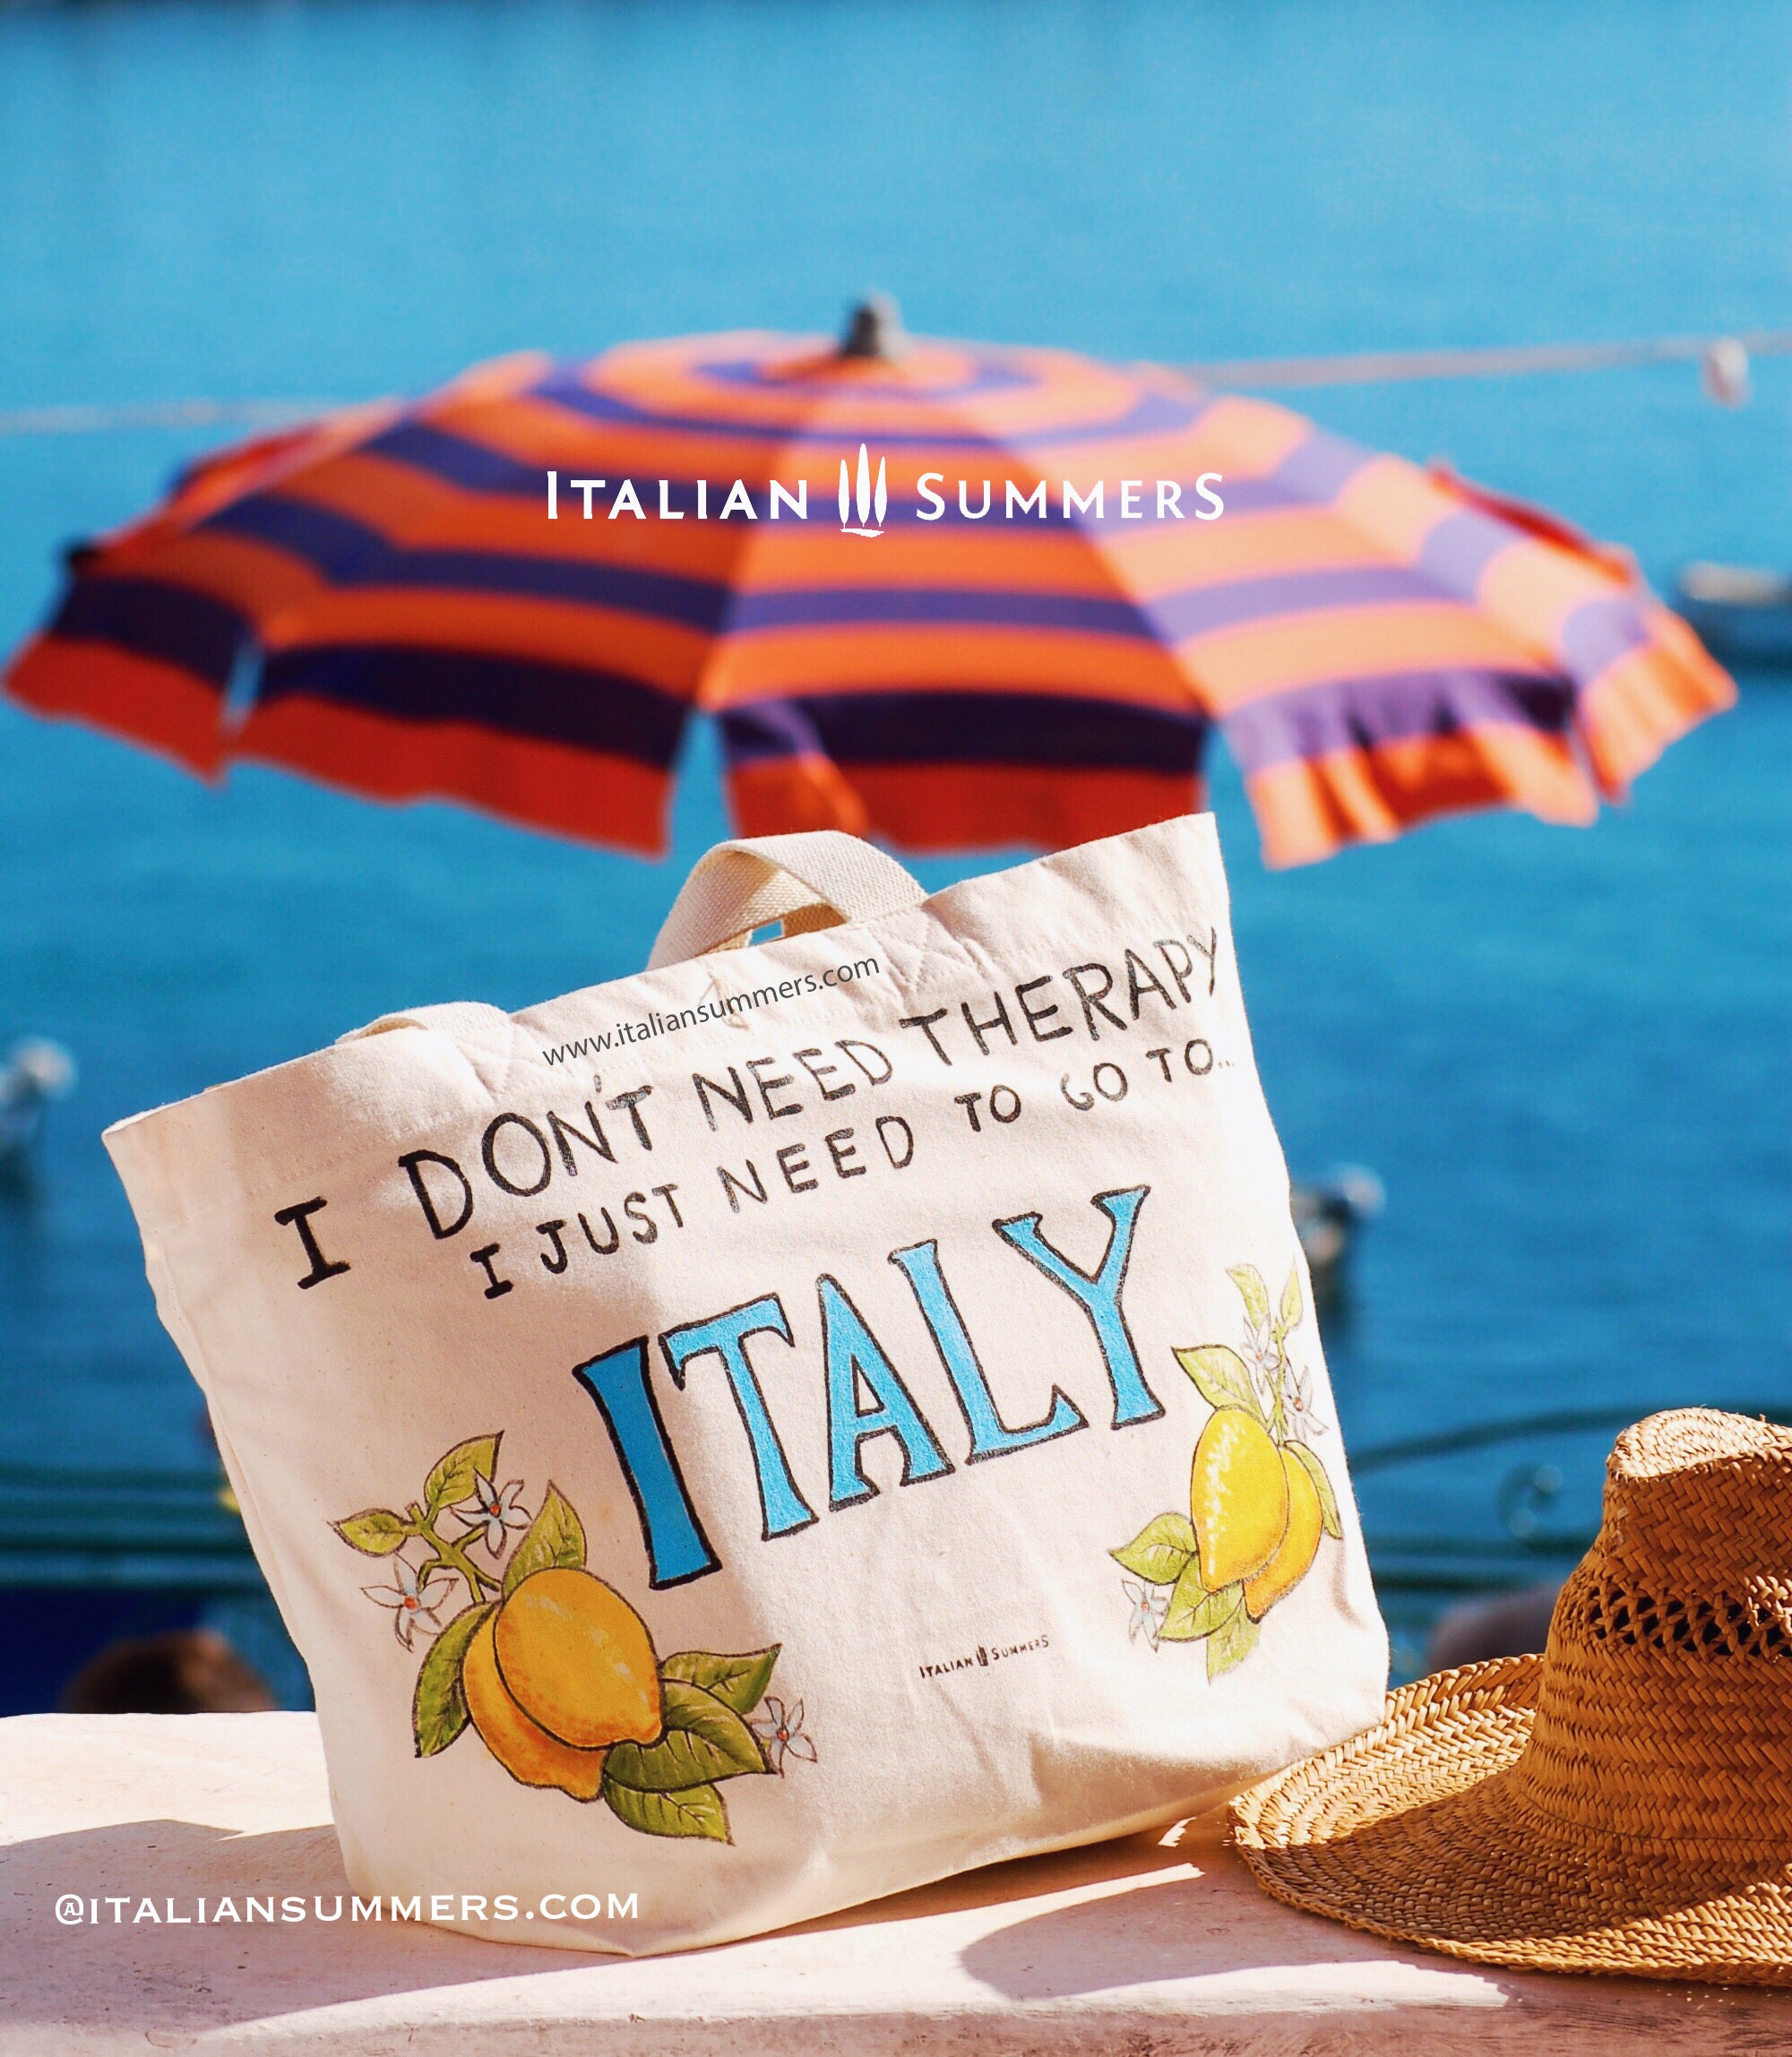 Tote bag "I don't need therapy, I just need to go to Italy" by Italian Summers ©Italian Summers